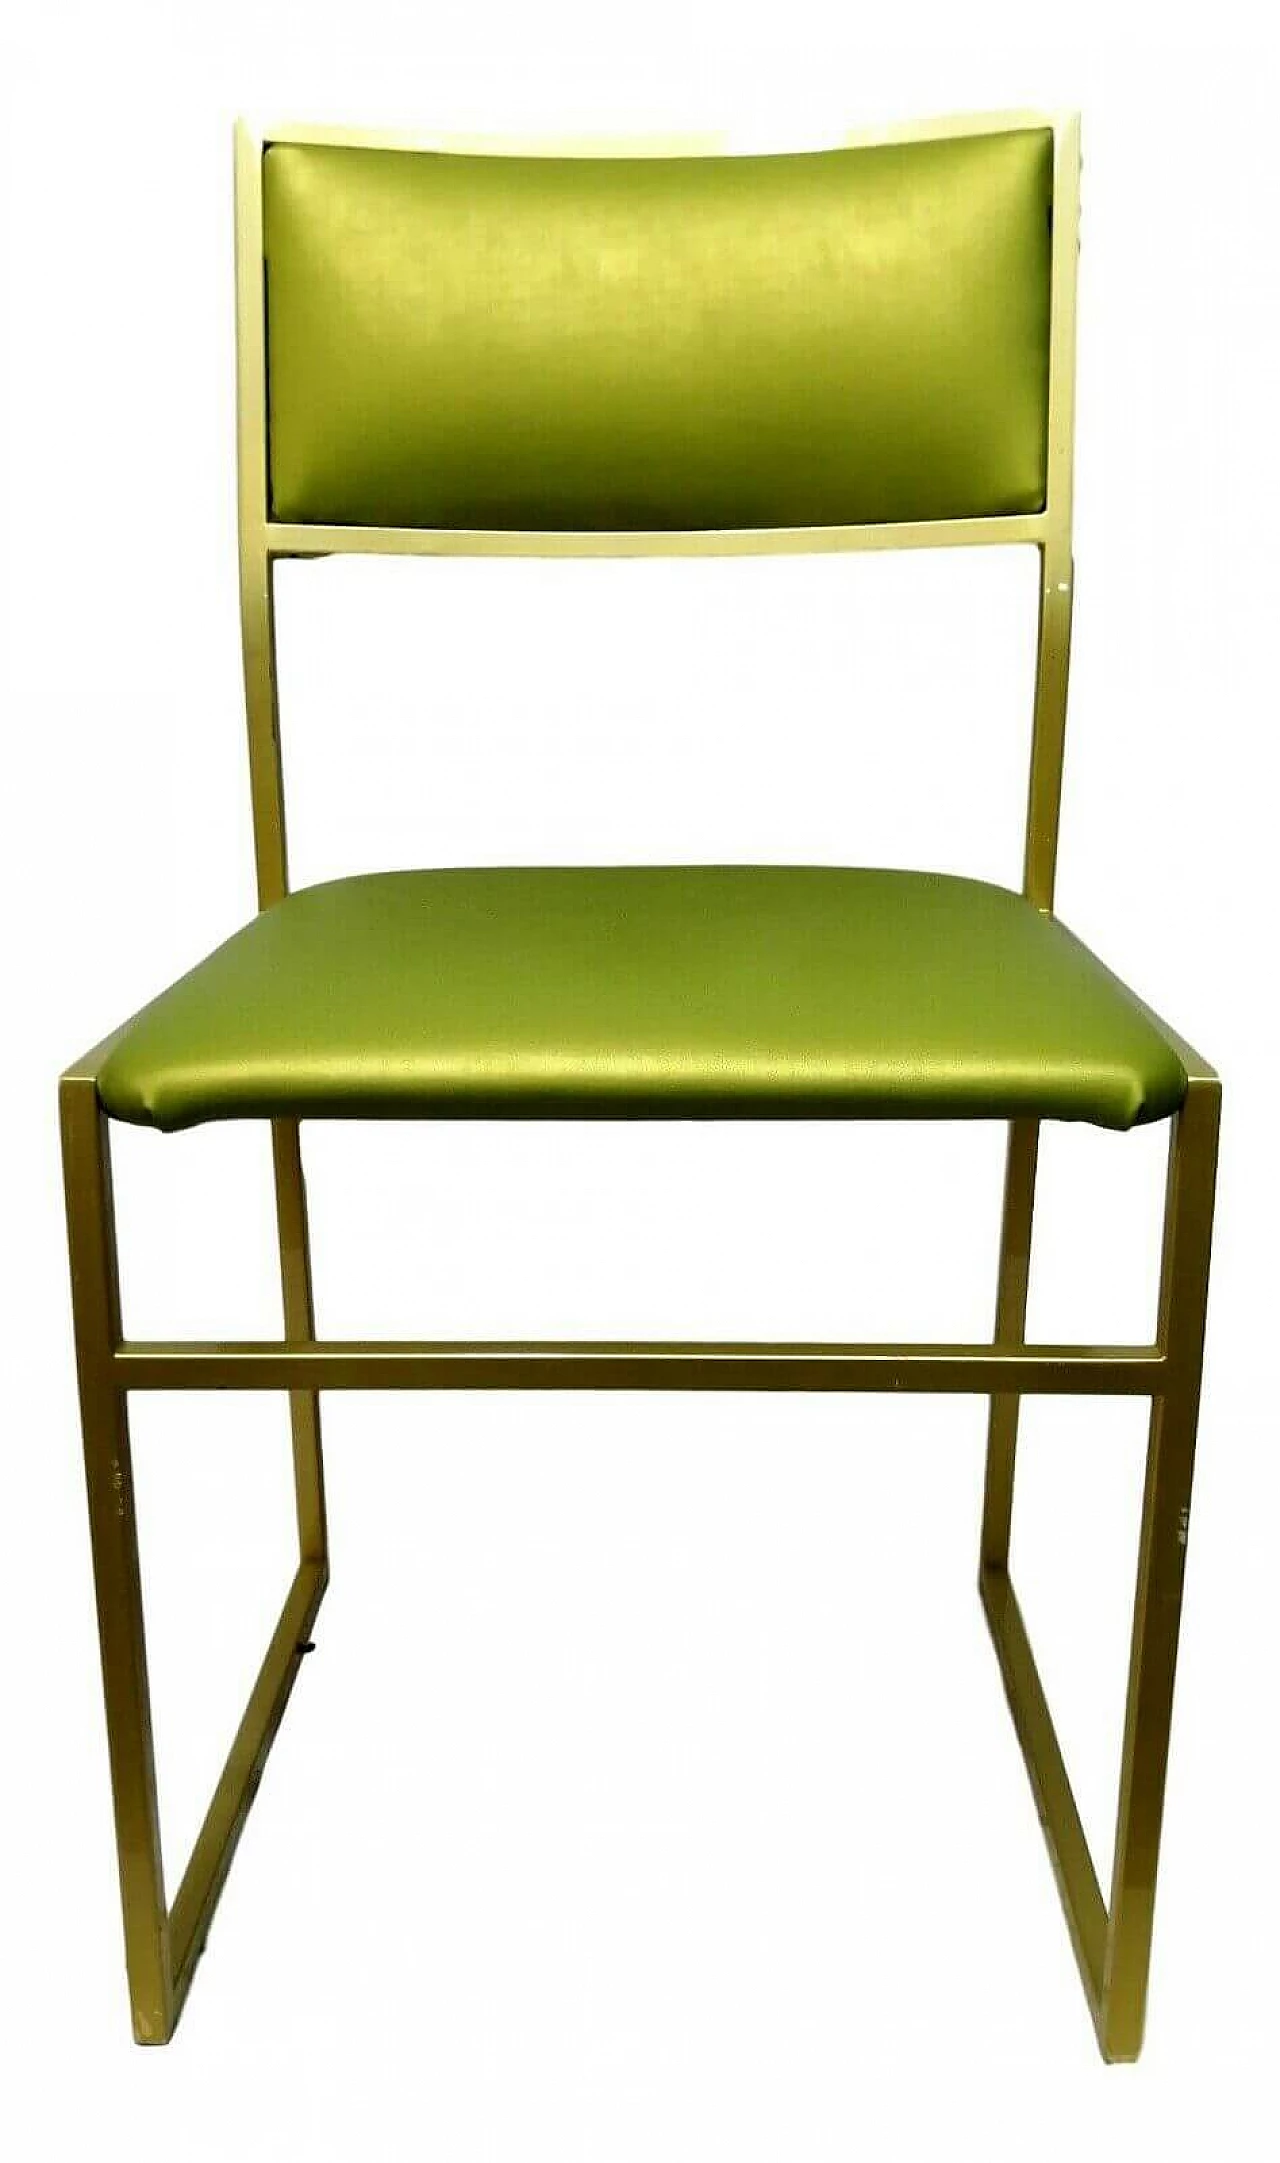 Metal chair and seat green, 70's 1166232